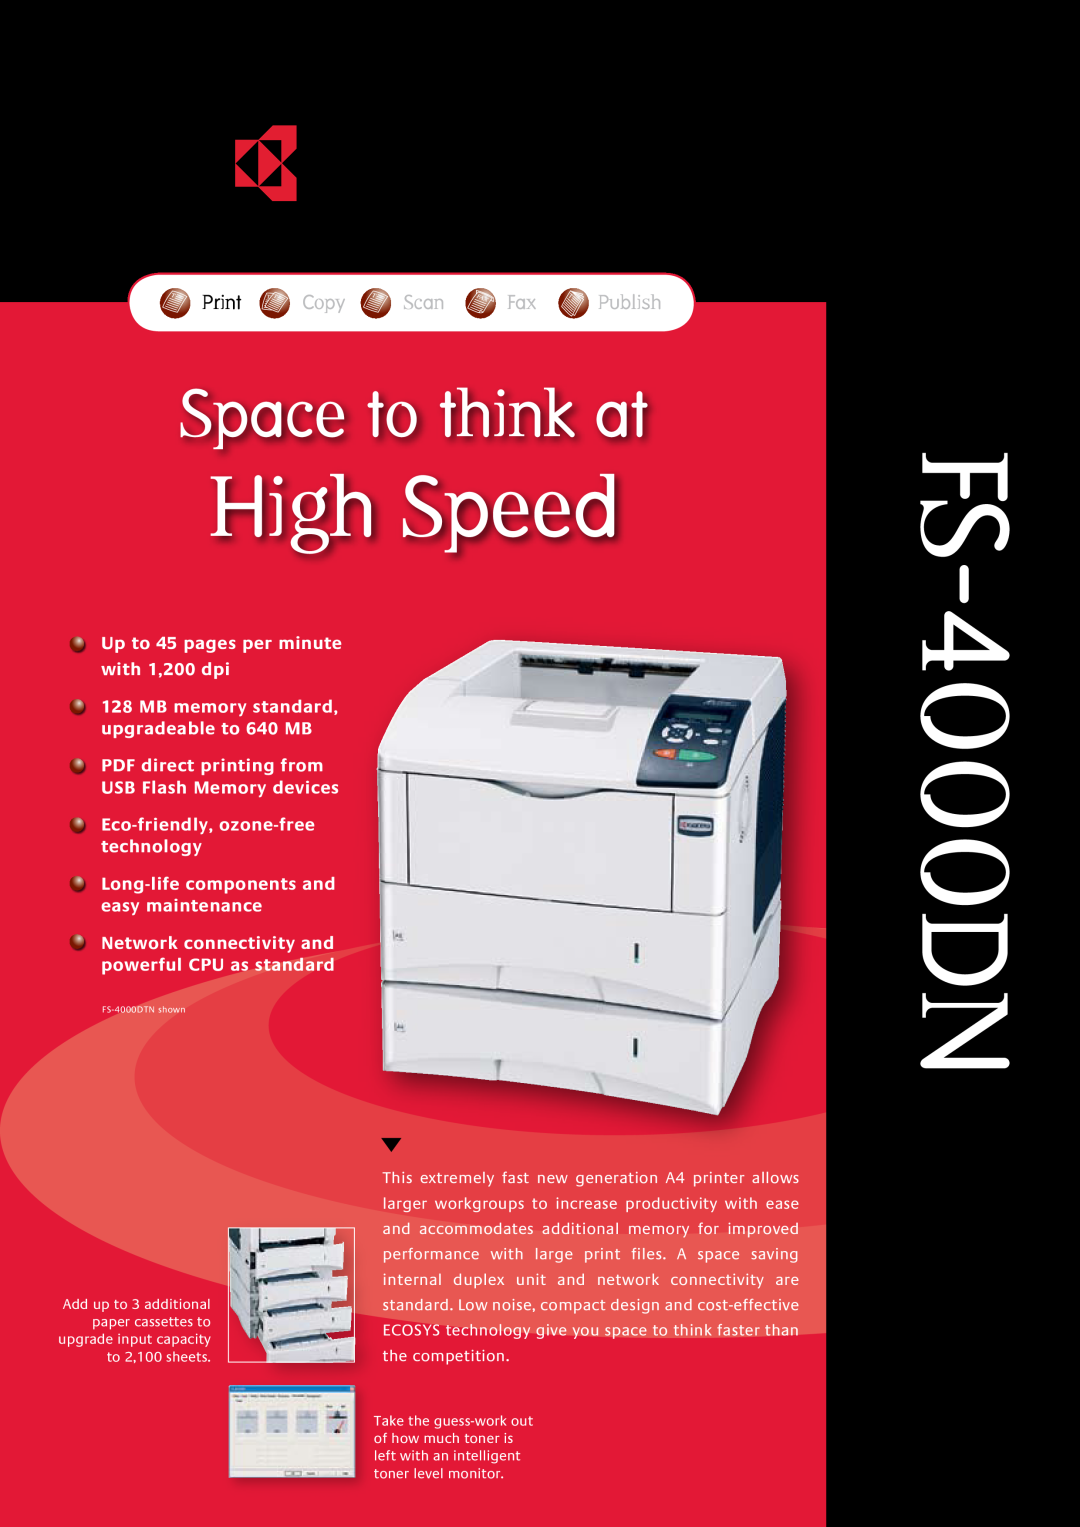 Epson FS-4000DN manual High Speed, Space to think at, Print Copy Scan Fax Publish, Eco-friendly, ozone-free technology 